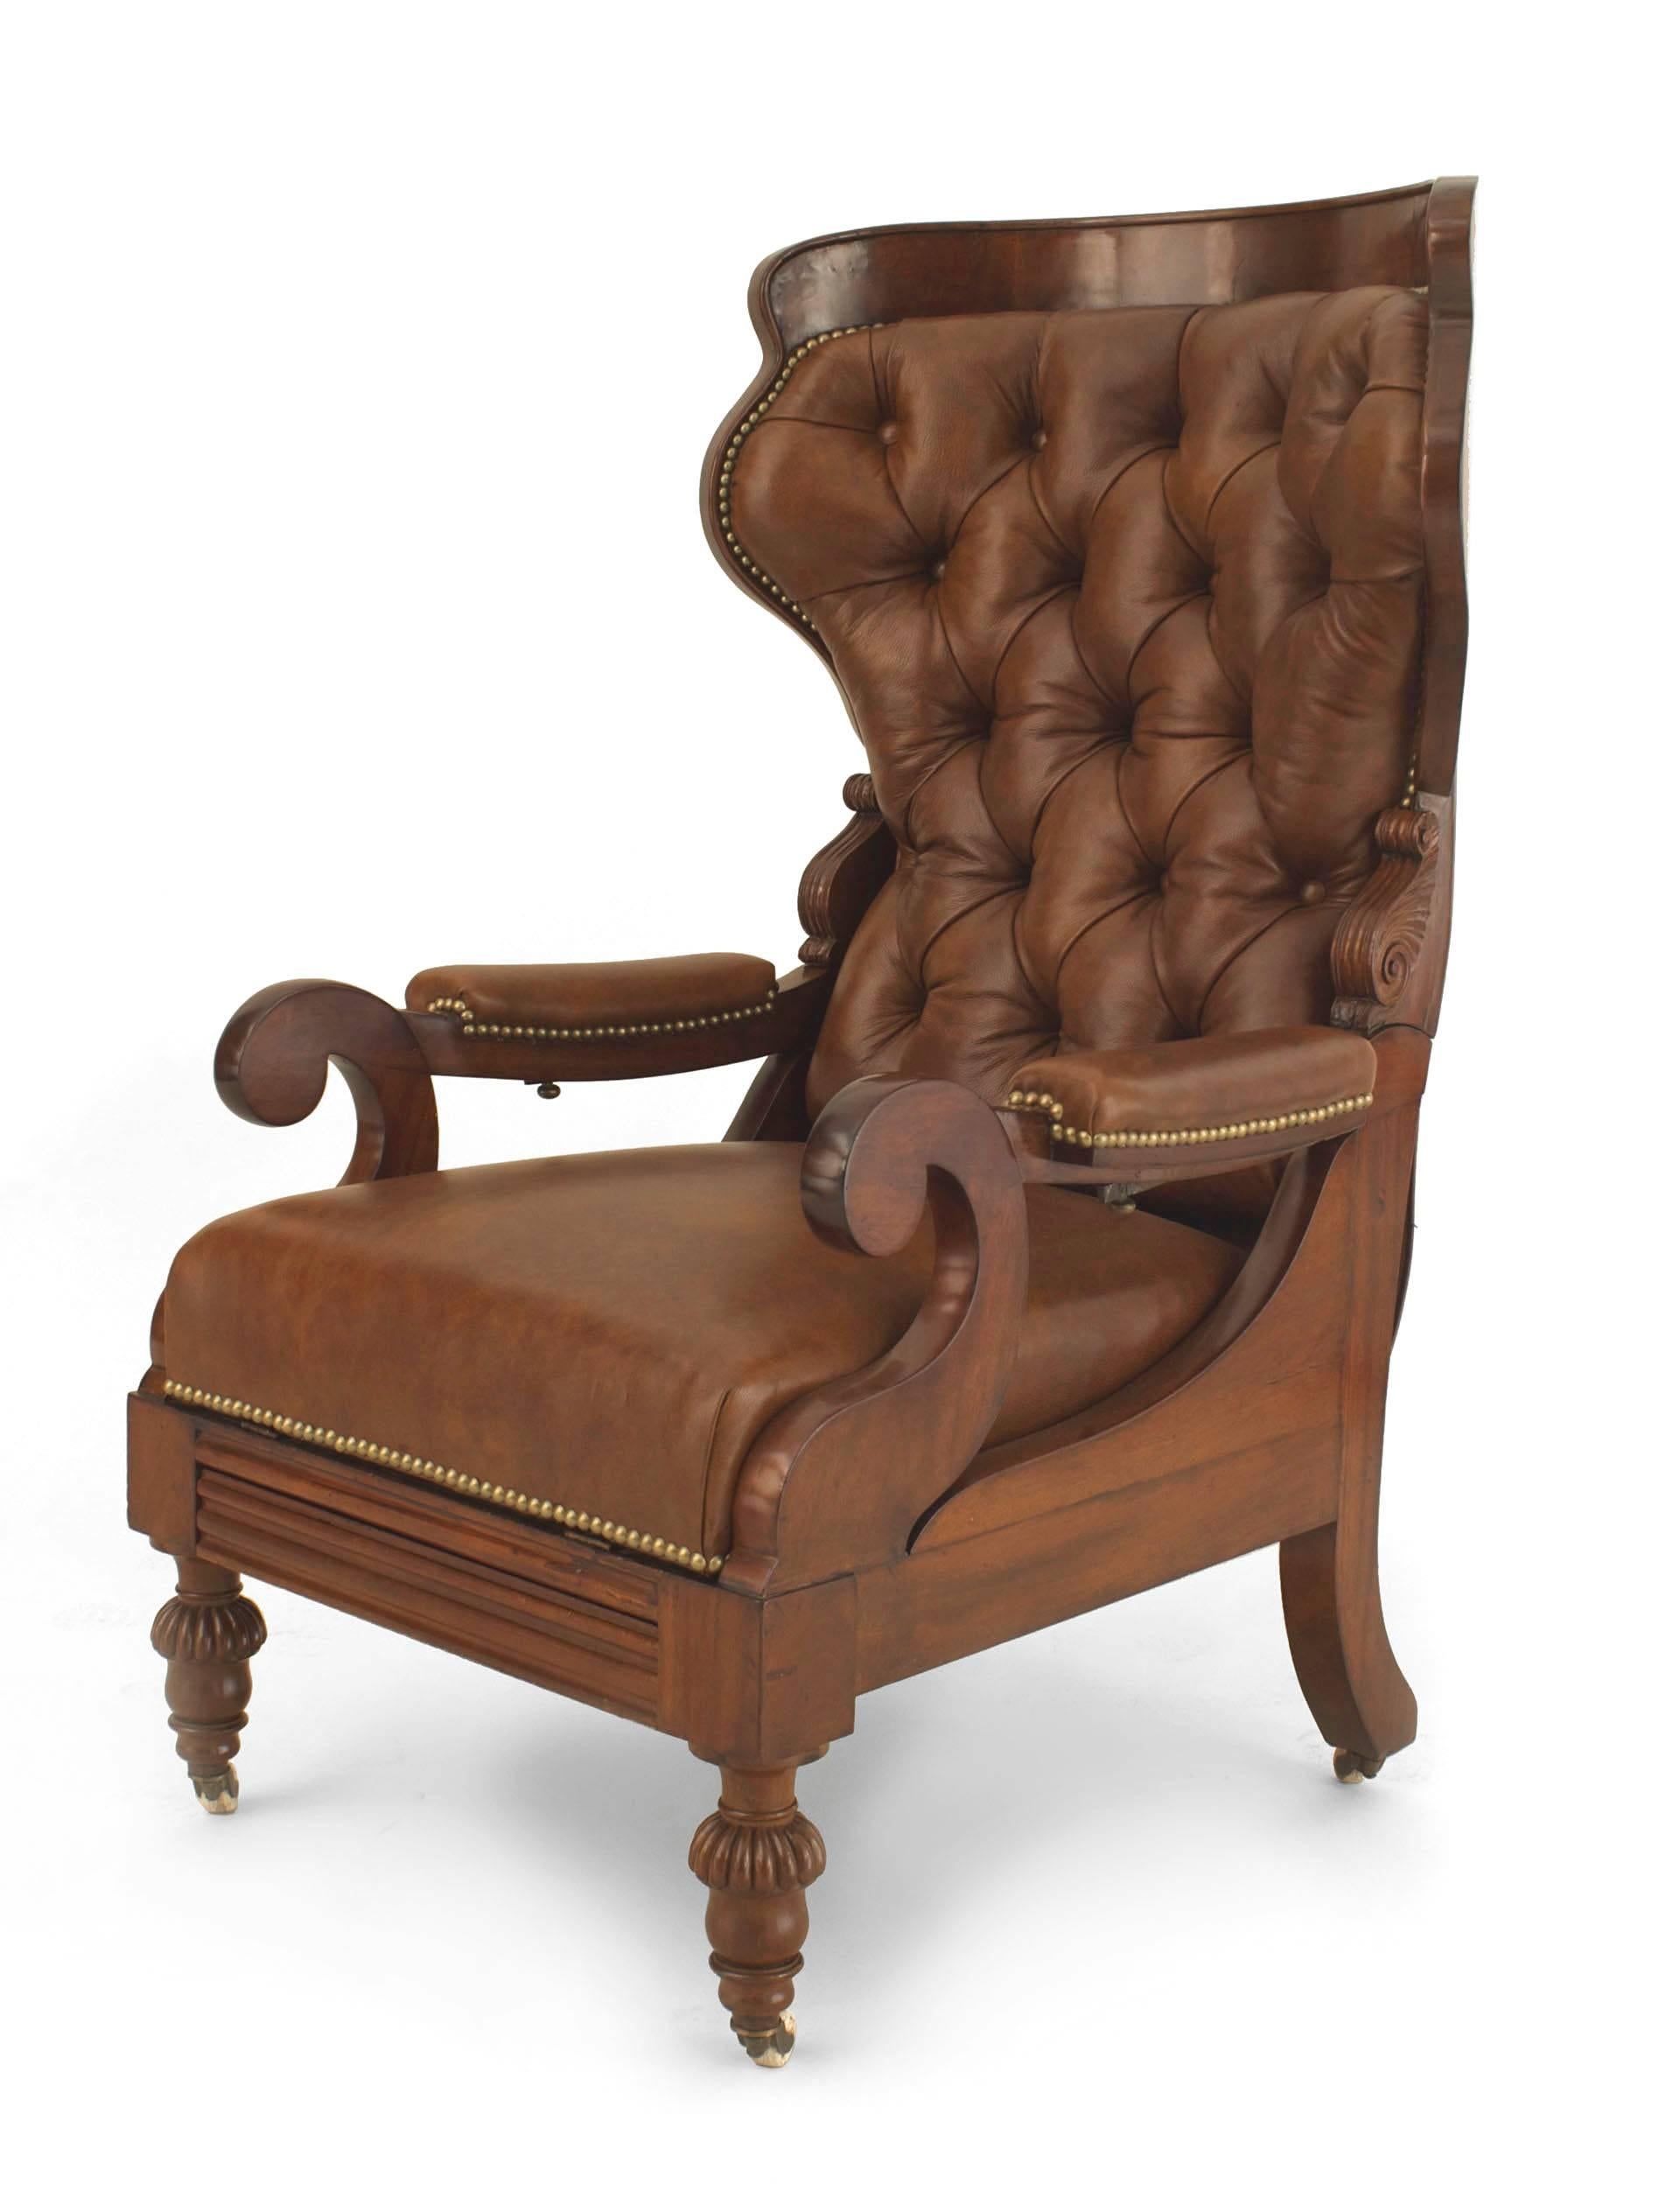 English Victorian (2nd Quarter 19th Century) mahogany reclining adjustable arm chair with foot rest and upholstered in brown leather having a tufted round back with nail head trim.
